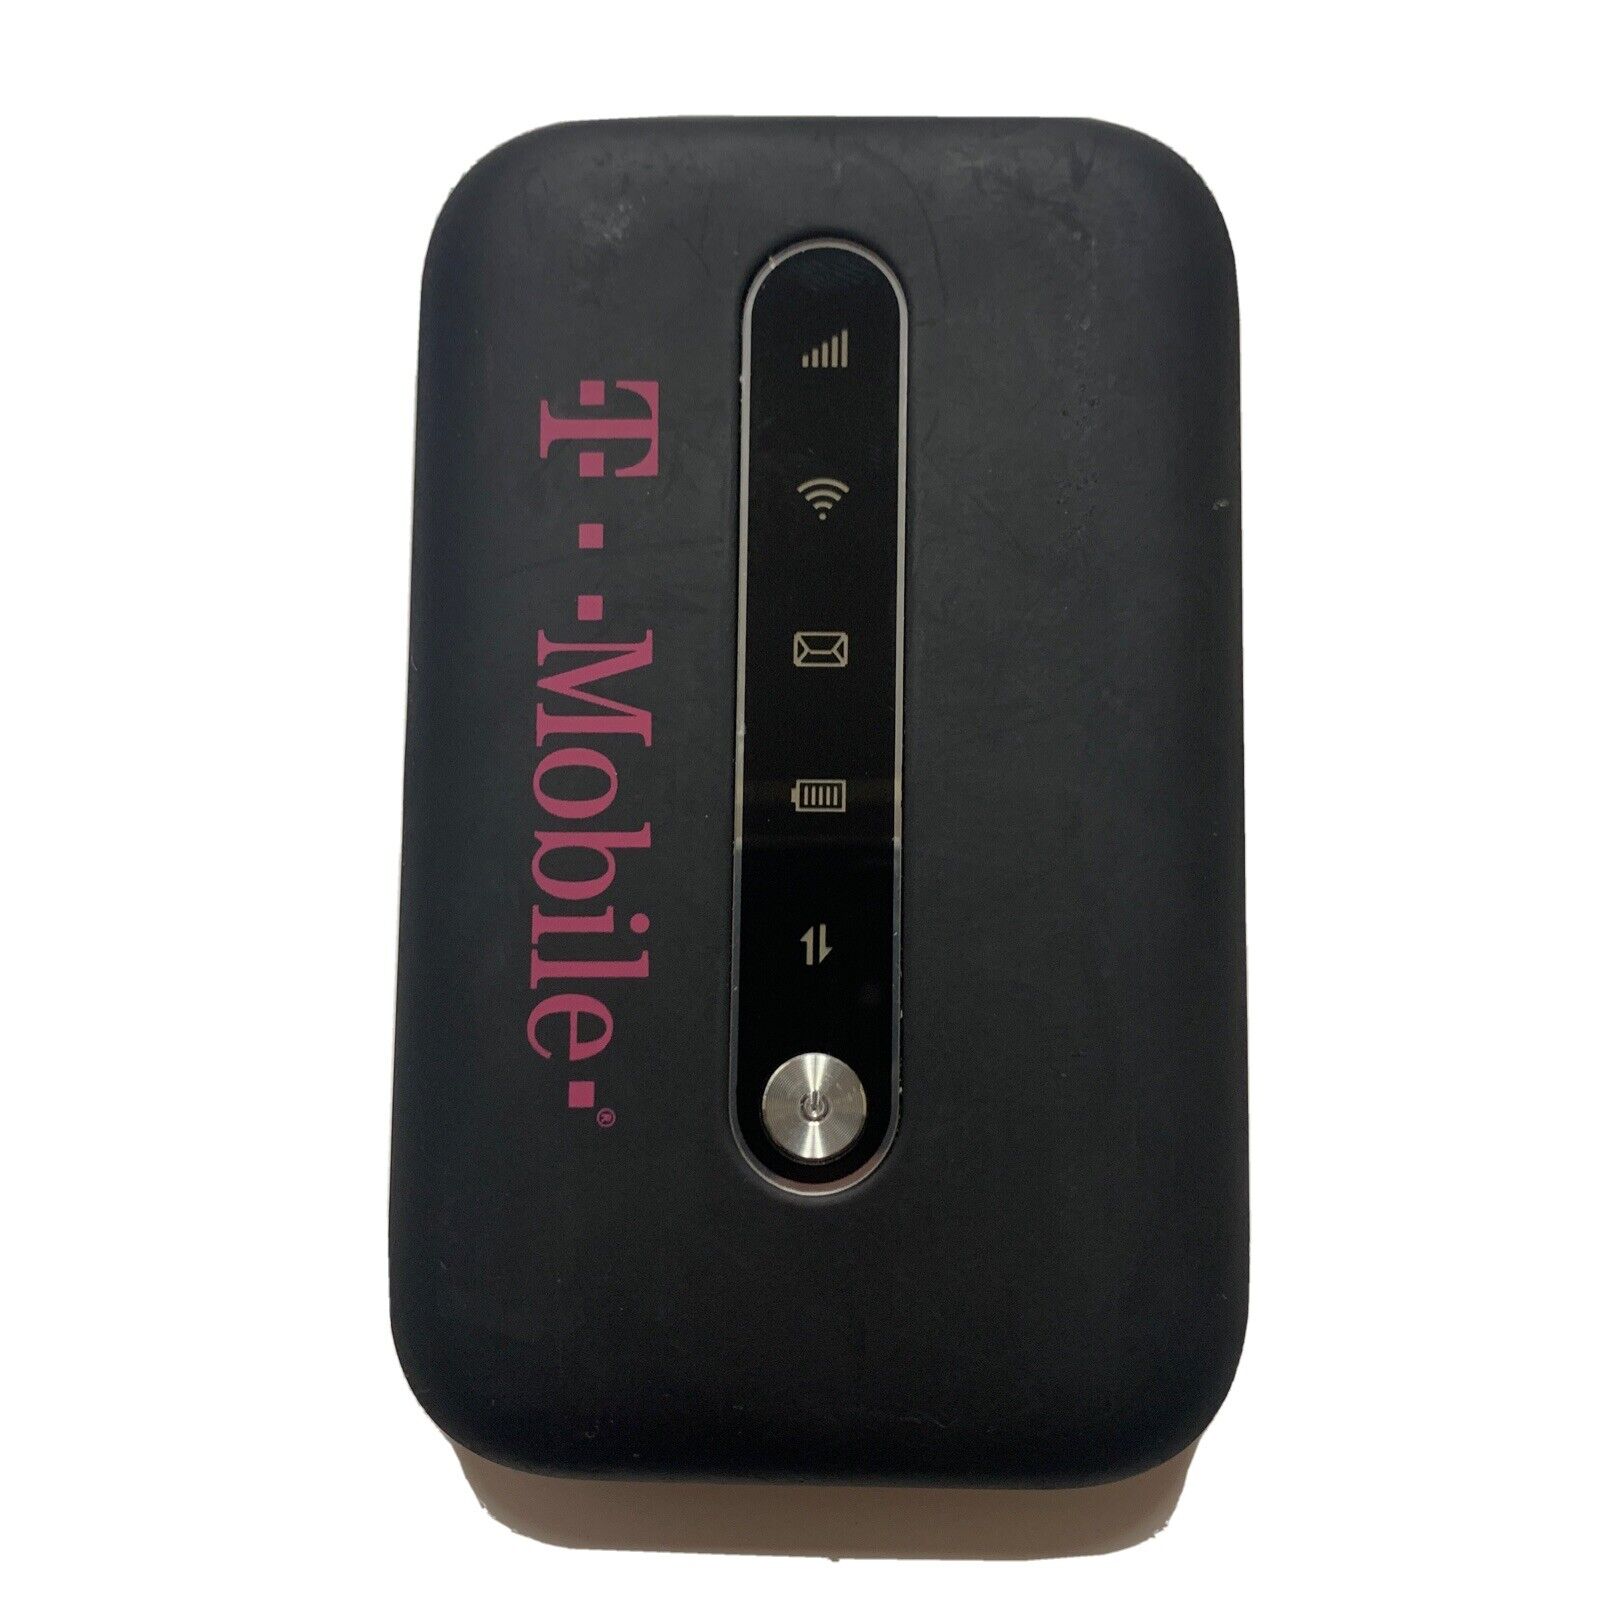 T-Mobile Coolpad Surf 4G LTE WiFi Hotspot - USED - No SIM card/service included